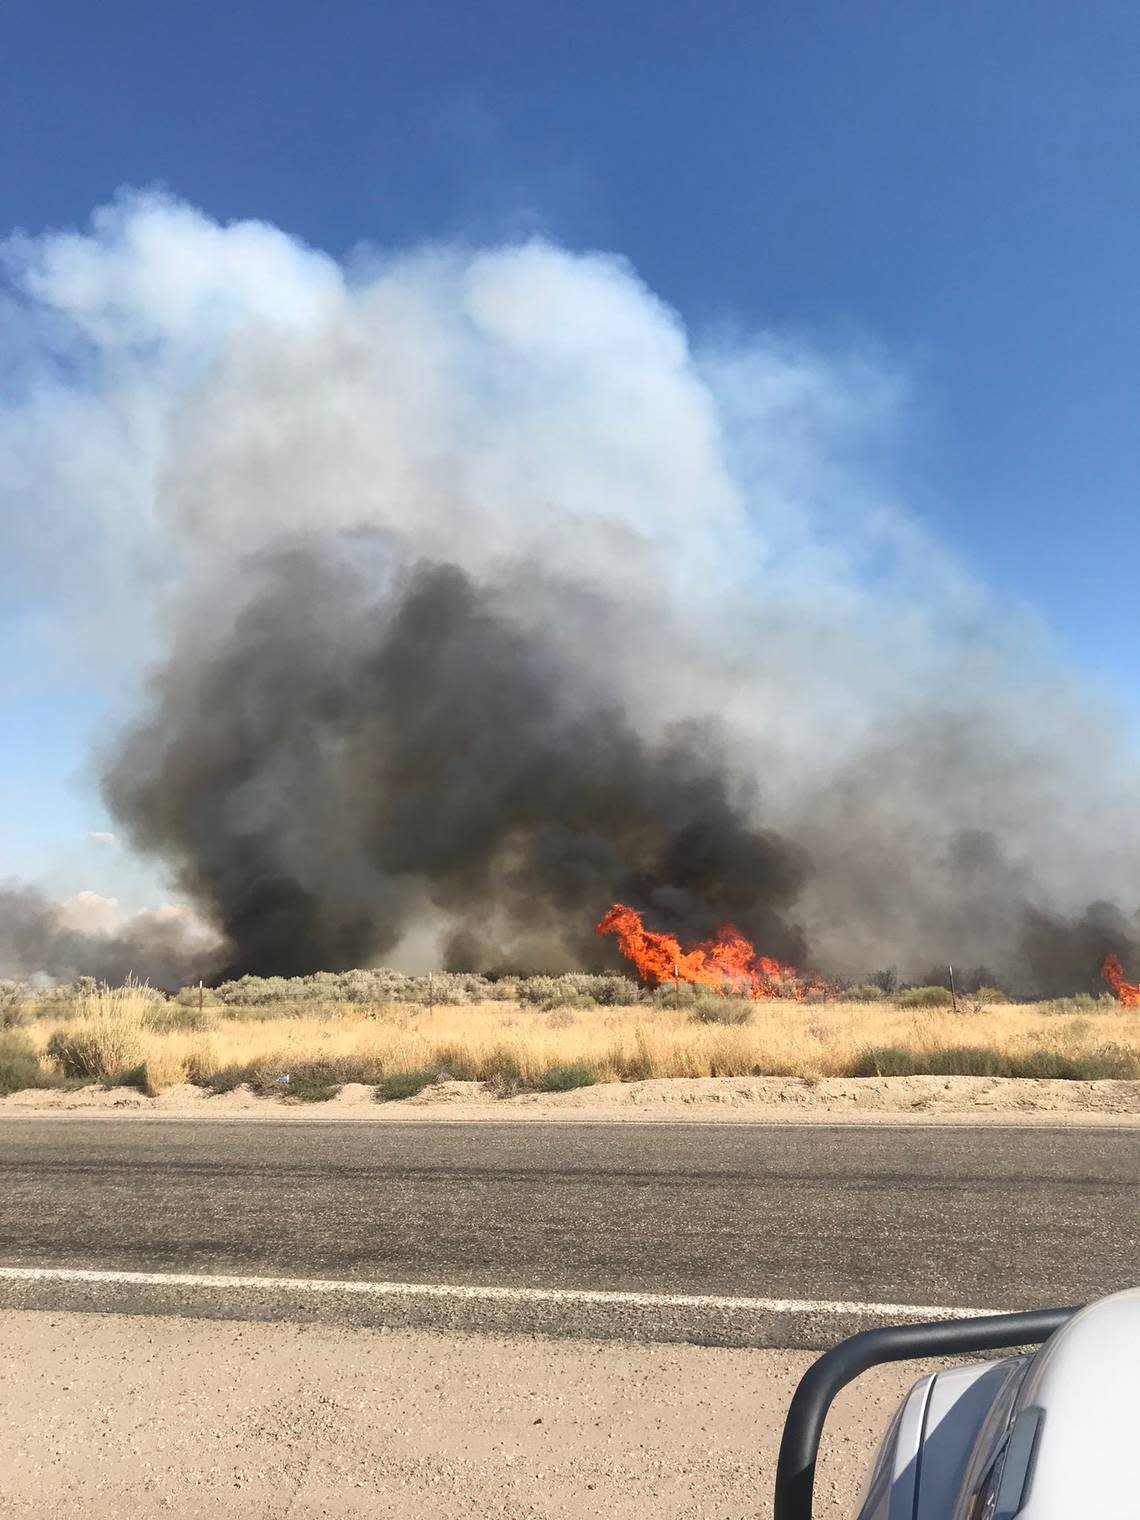 The grass and brush fire, which was contained by 8 p.m. Monday, ballooned to over 700 acres.